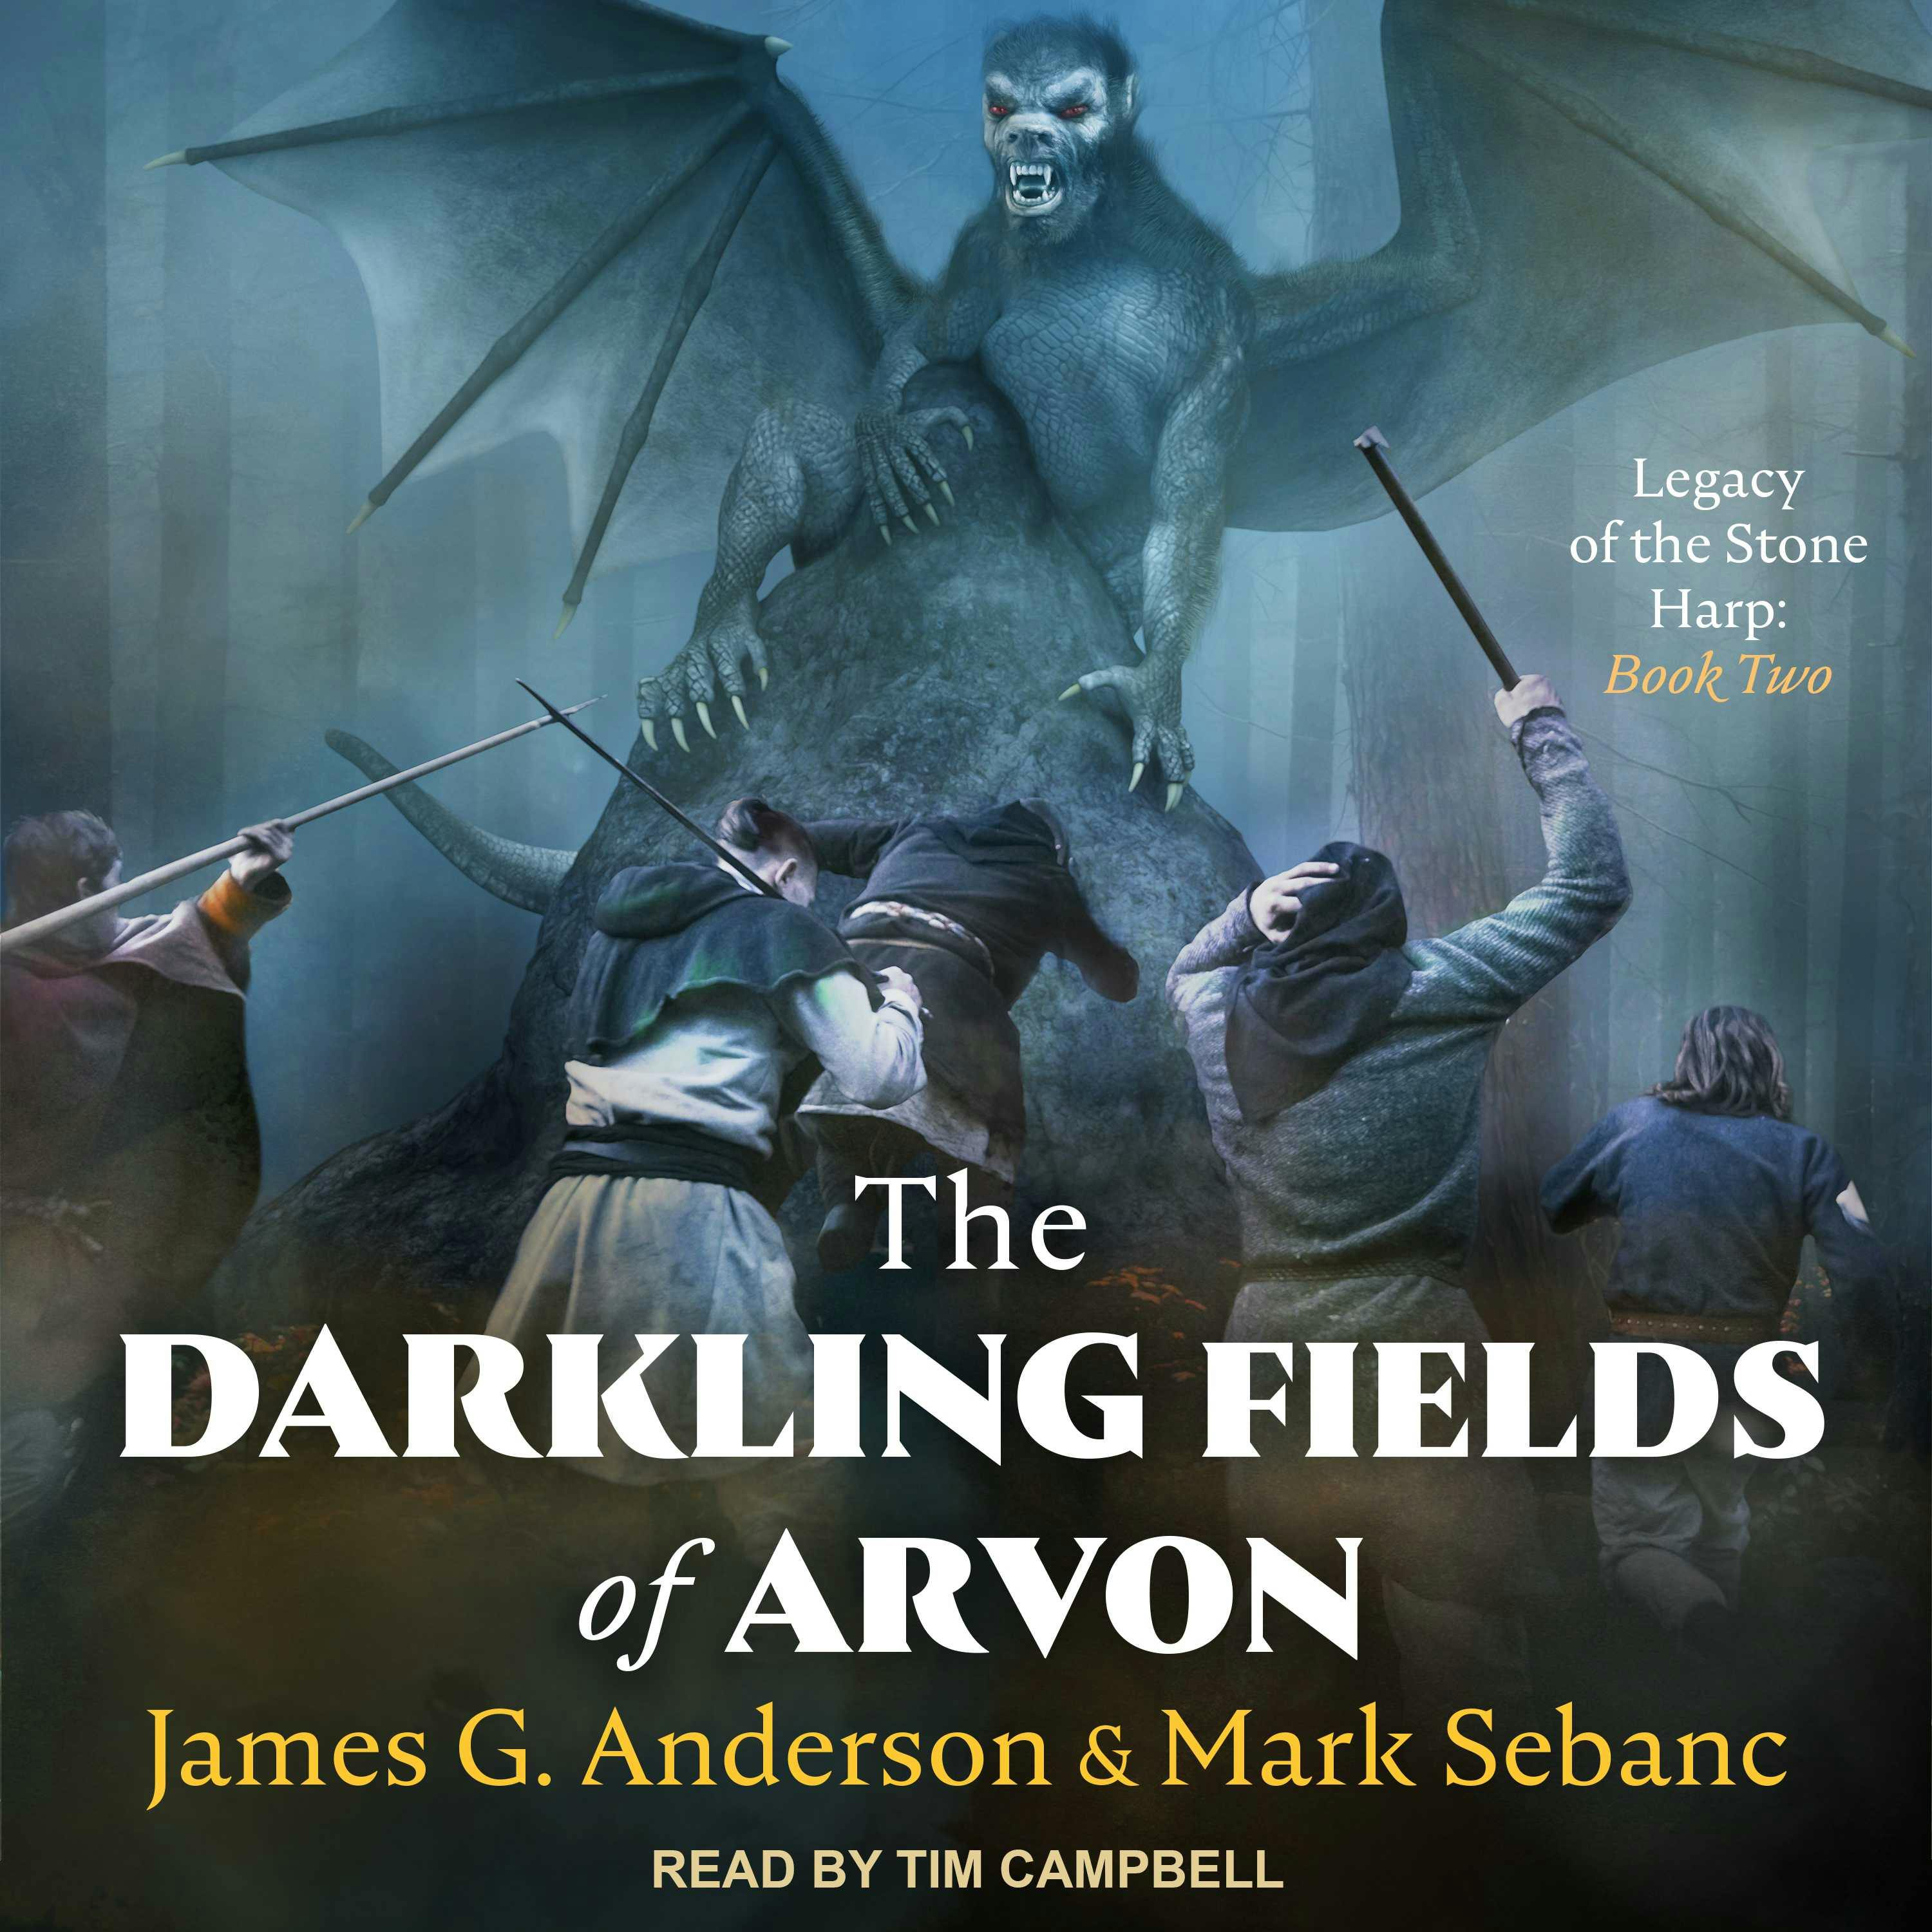 The Darkling Fields of Arvon: Legacy of the Stone Harp: Book Two - Mark Sebanc, James G. Anderson